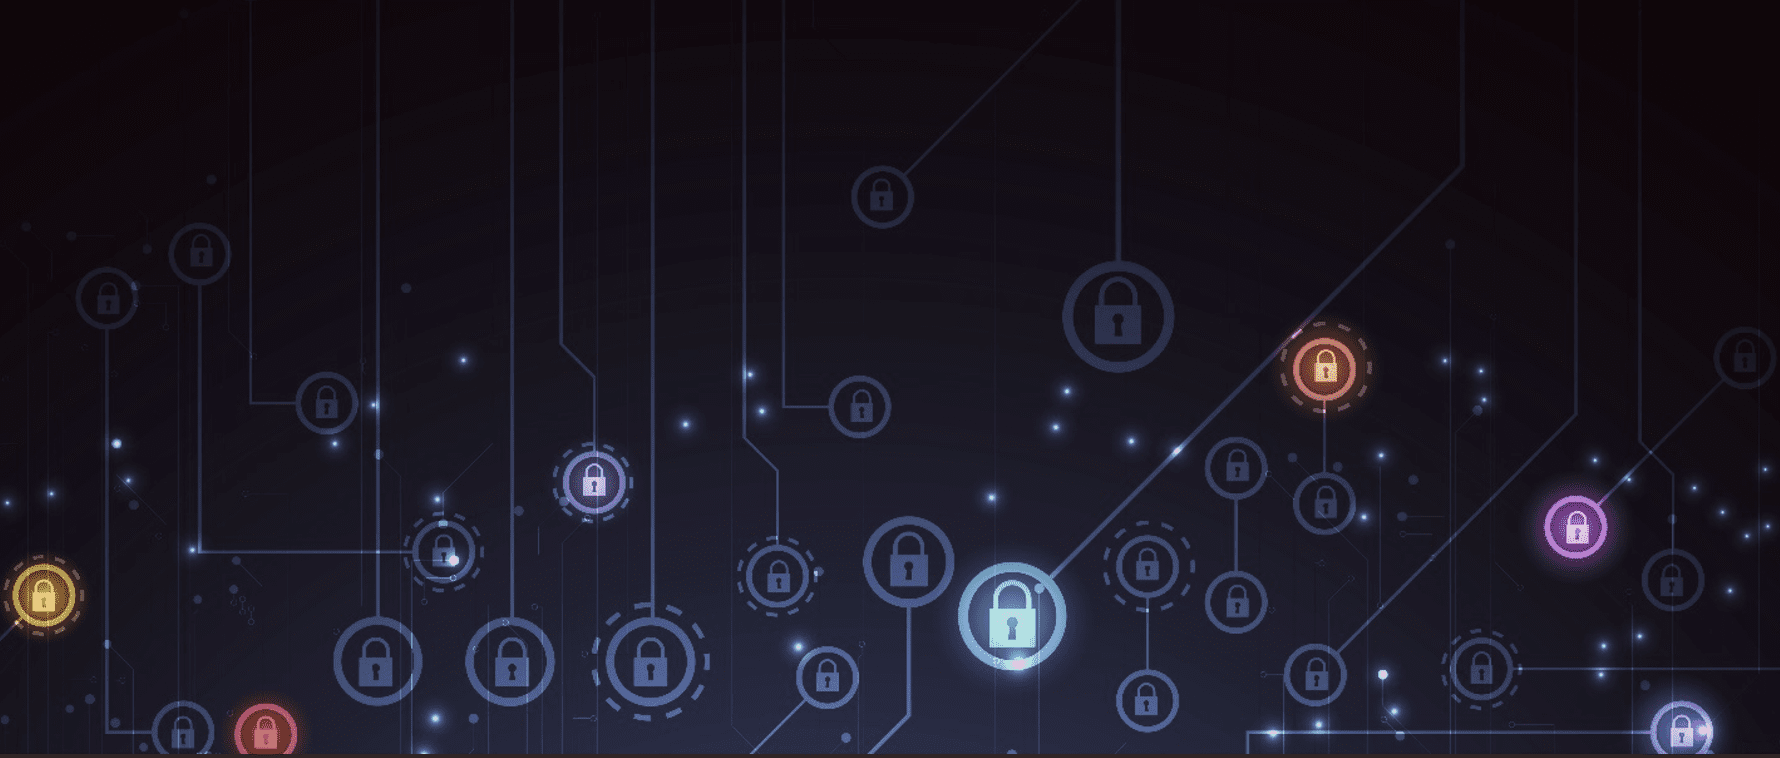 Email security for Microsoft 365 – Digital representation of interconnected locks